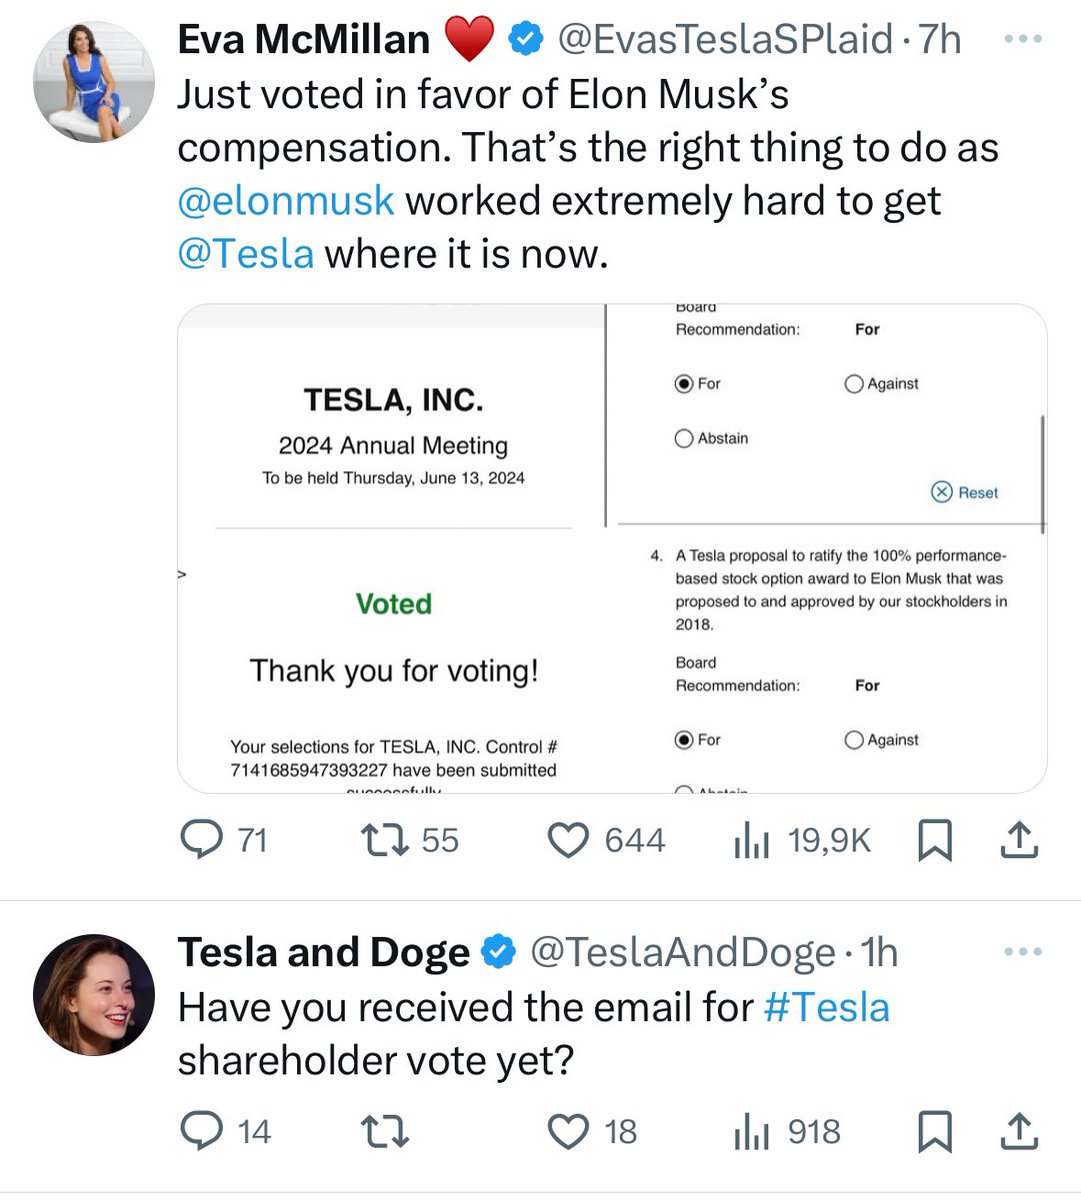 This concerted effort to make people to vote in favour of Elon makes me think that a flood of NO is coming after the BoD. The one below is just an example. $TSLA #voteno